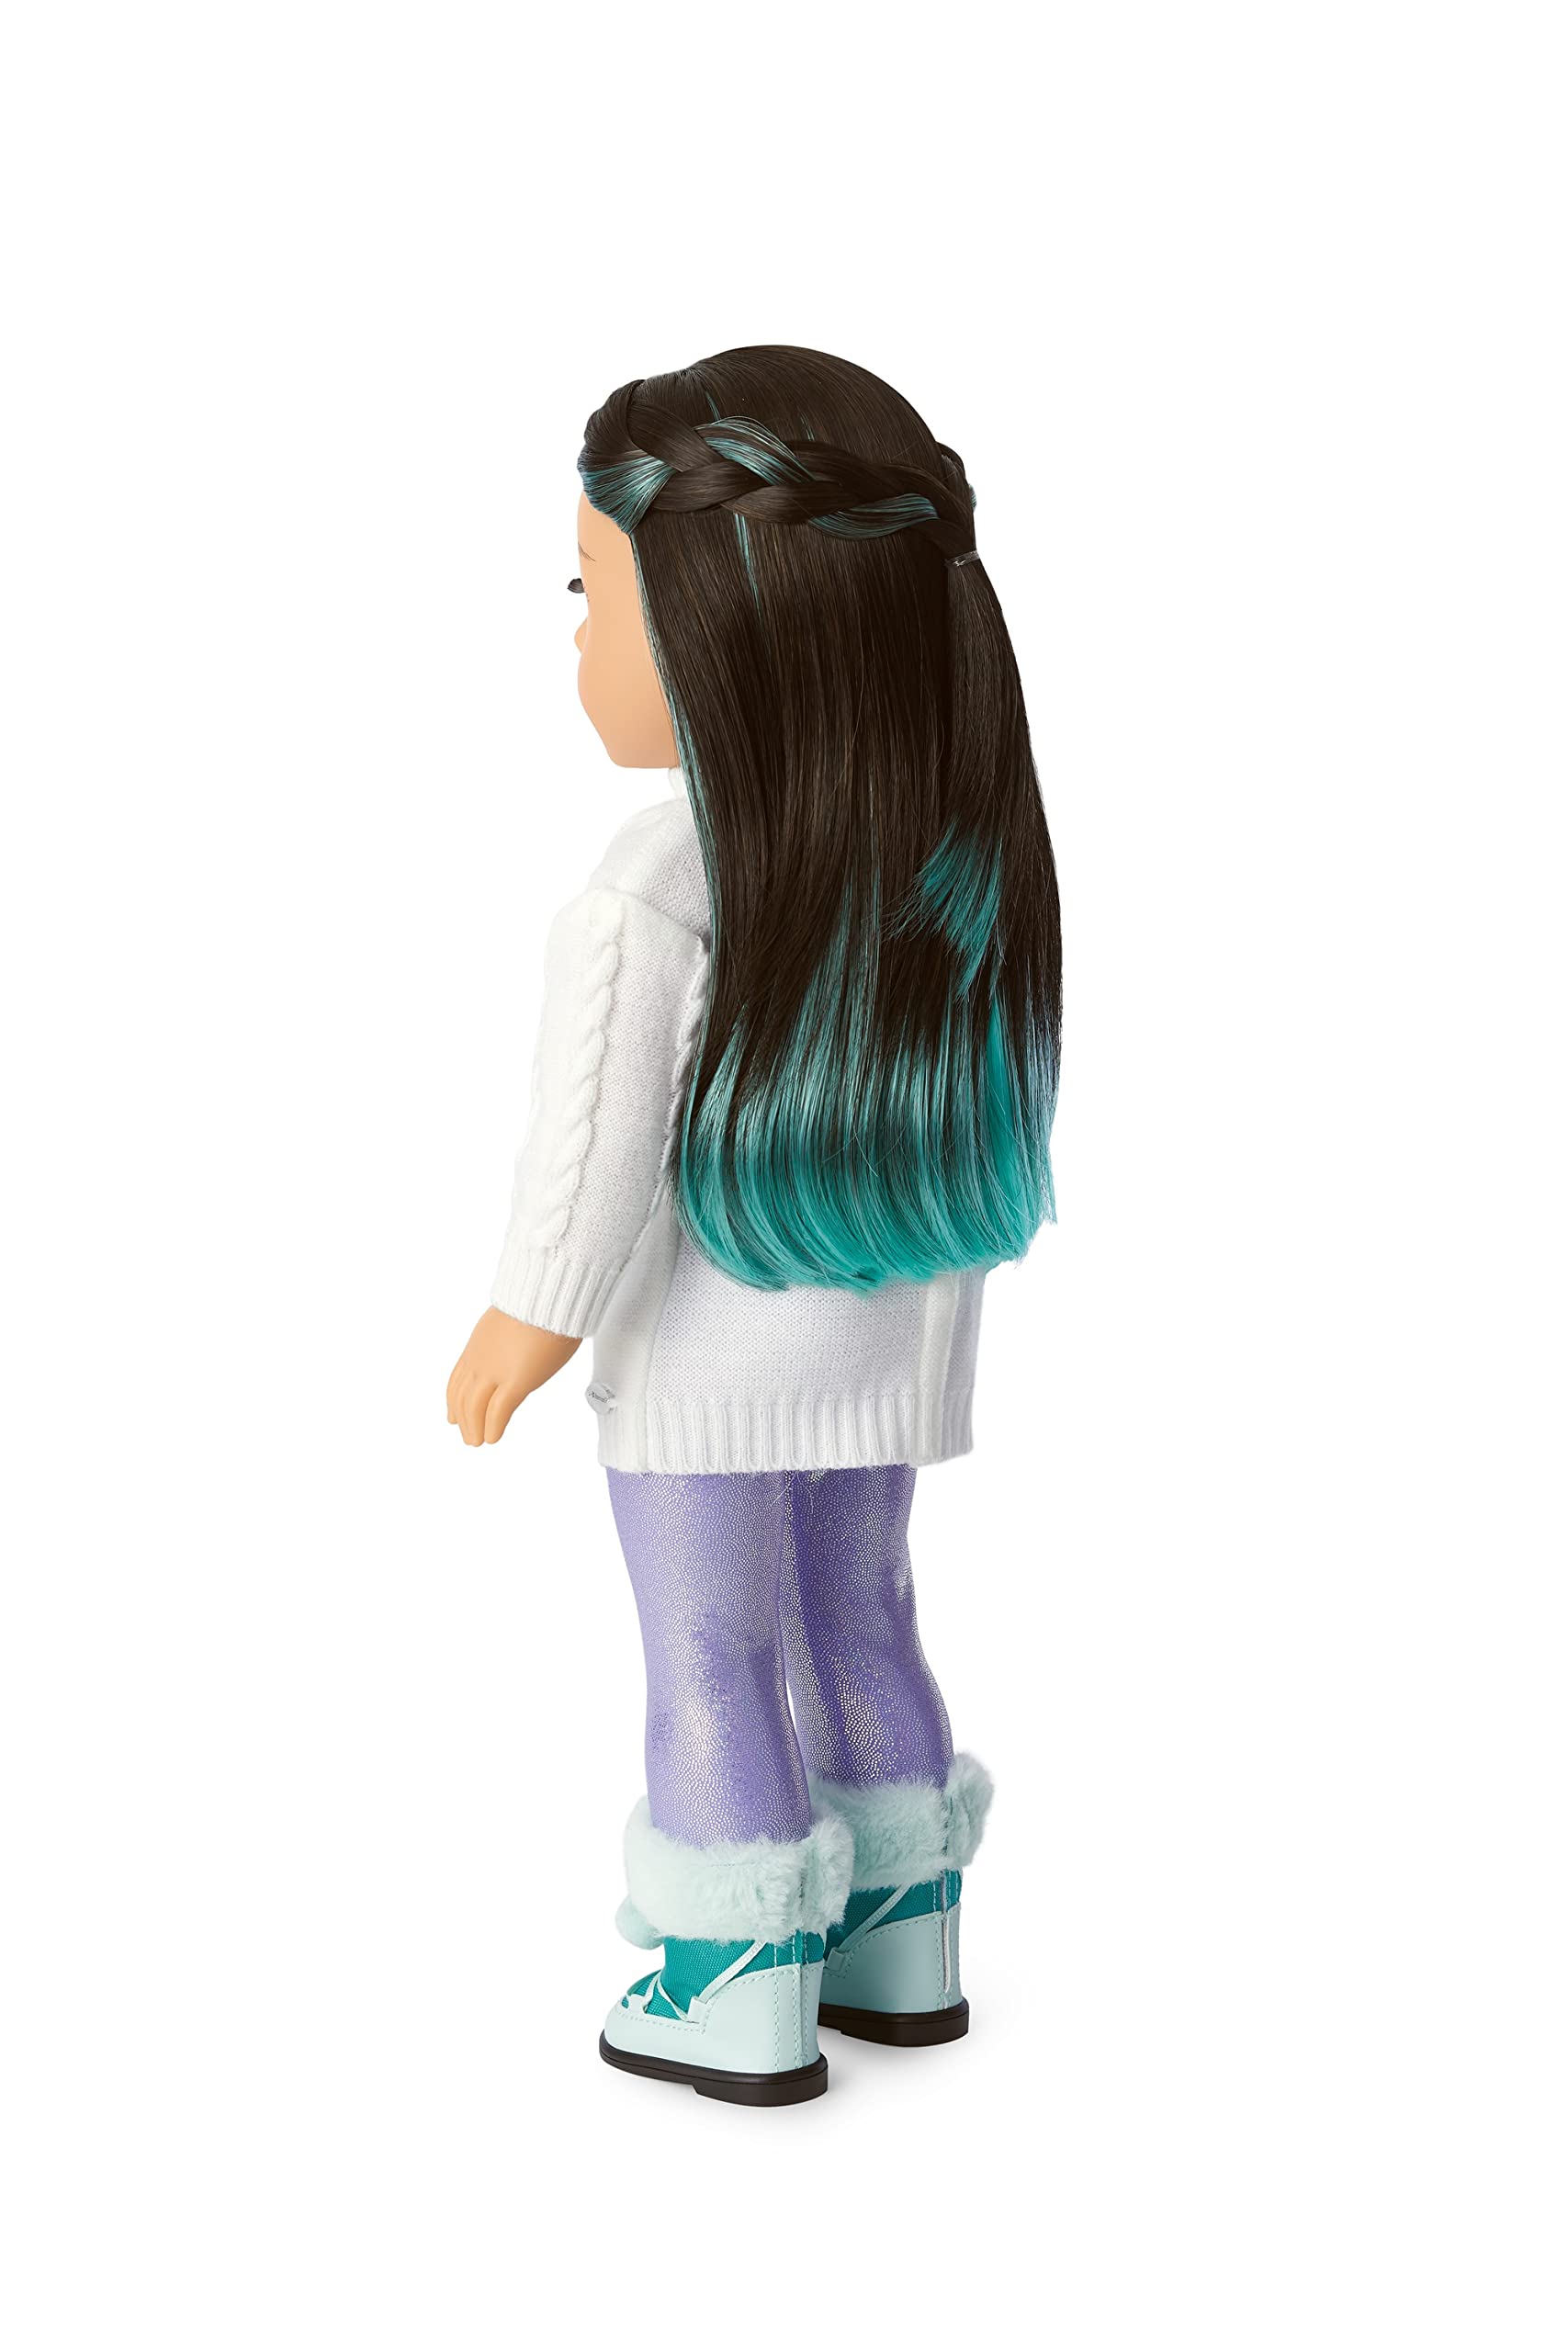 American Girl 2022 Girl of The Year Corinne 18-inch Doll & Book with Brown Eyes, Long Black Hair, Turquoise Layers, a White Cable-Knit Sweater, Iridescent Purple Leggings, and Paperback Book